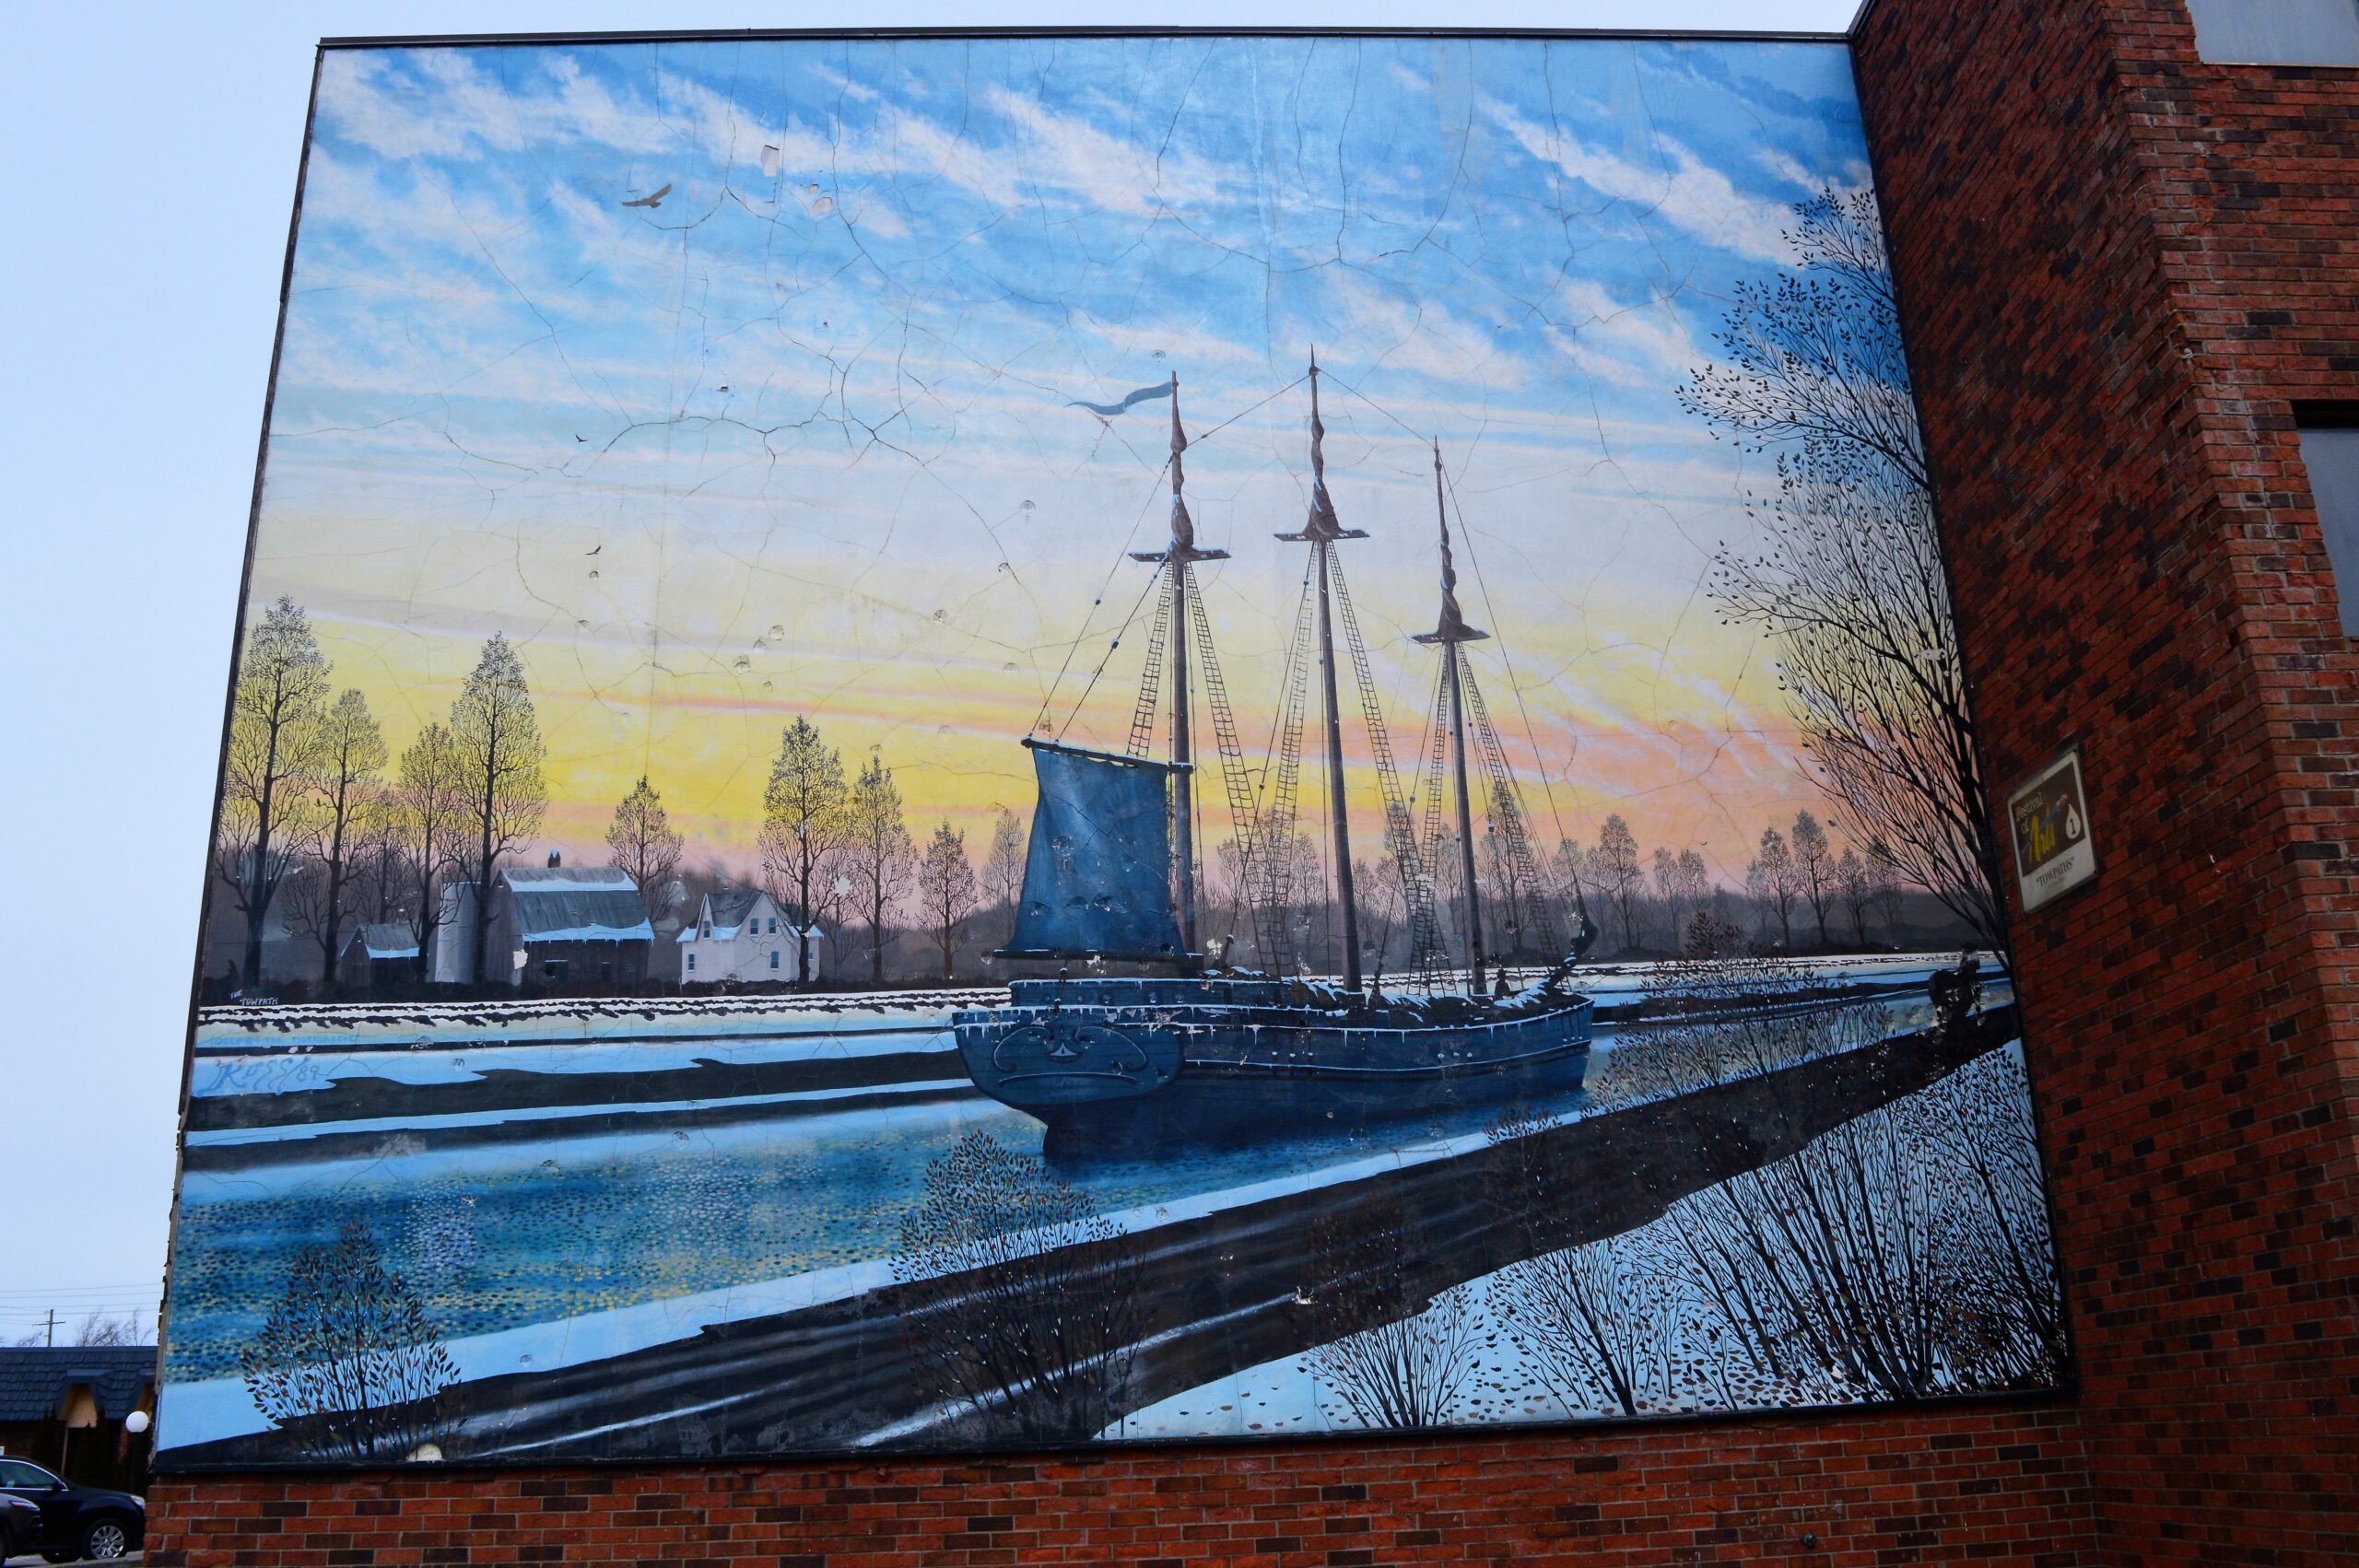 After consultation with art conservator, Towpath mural is best preserved through digital conservation